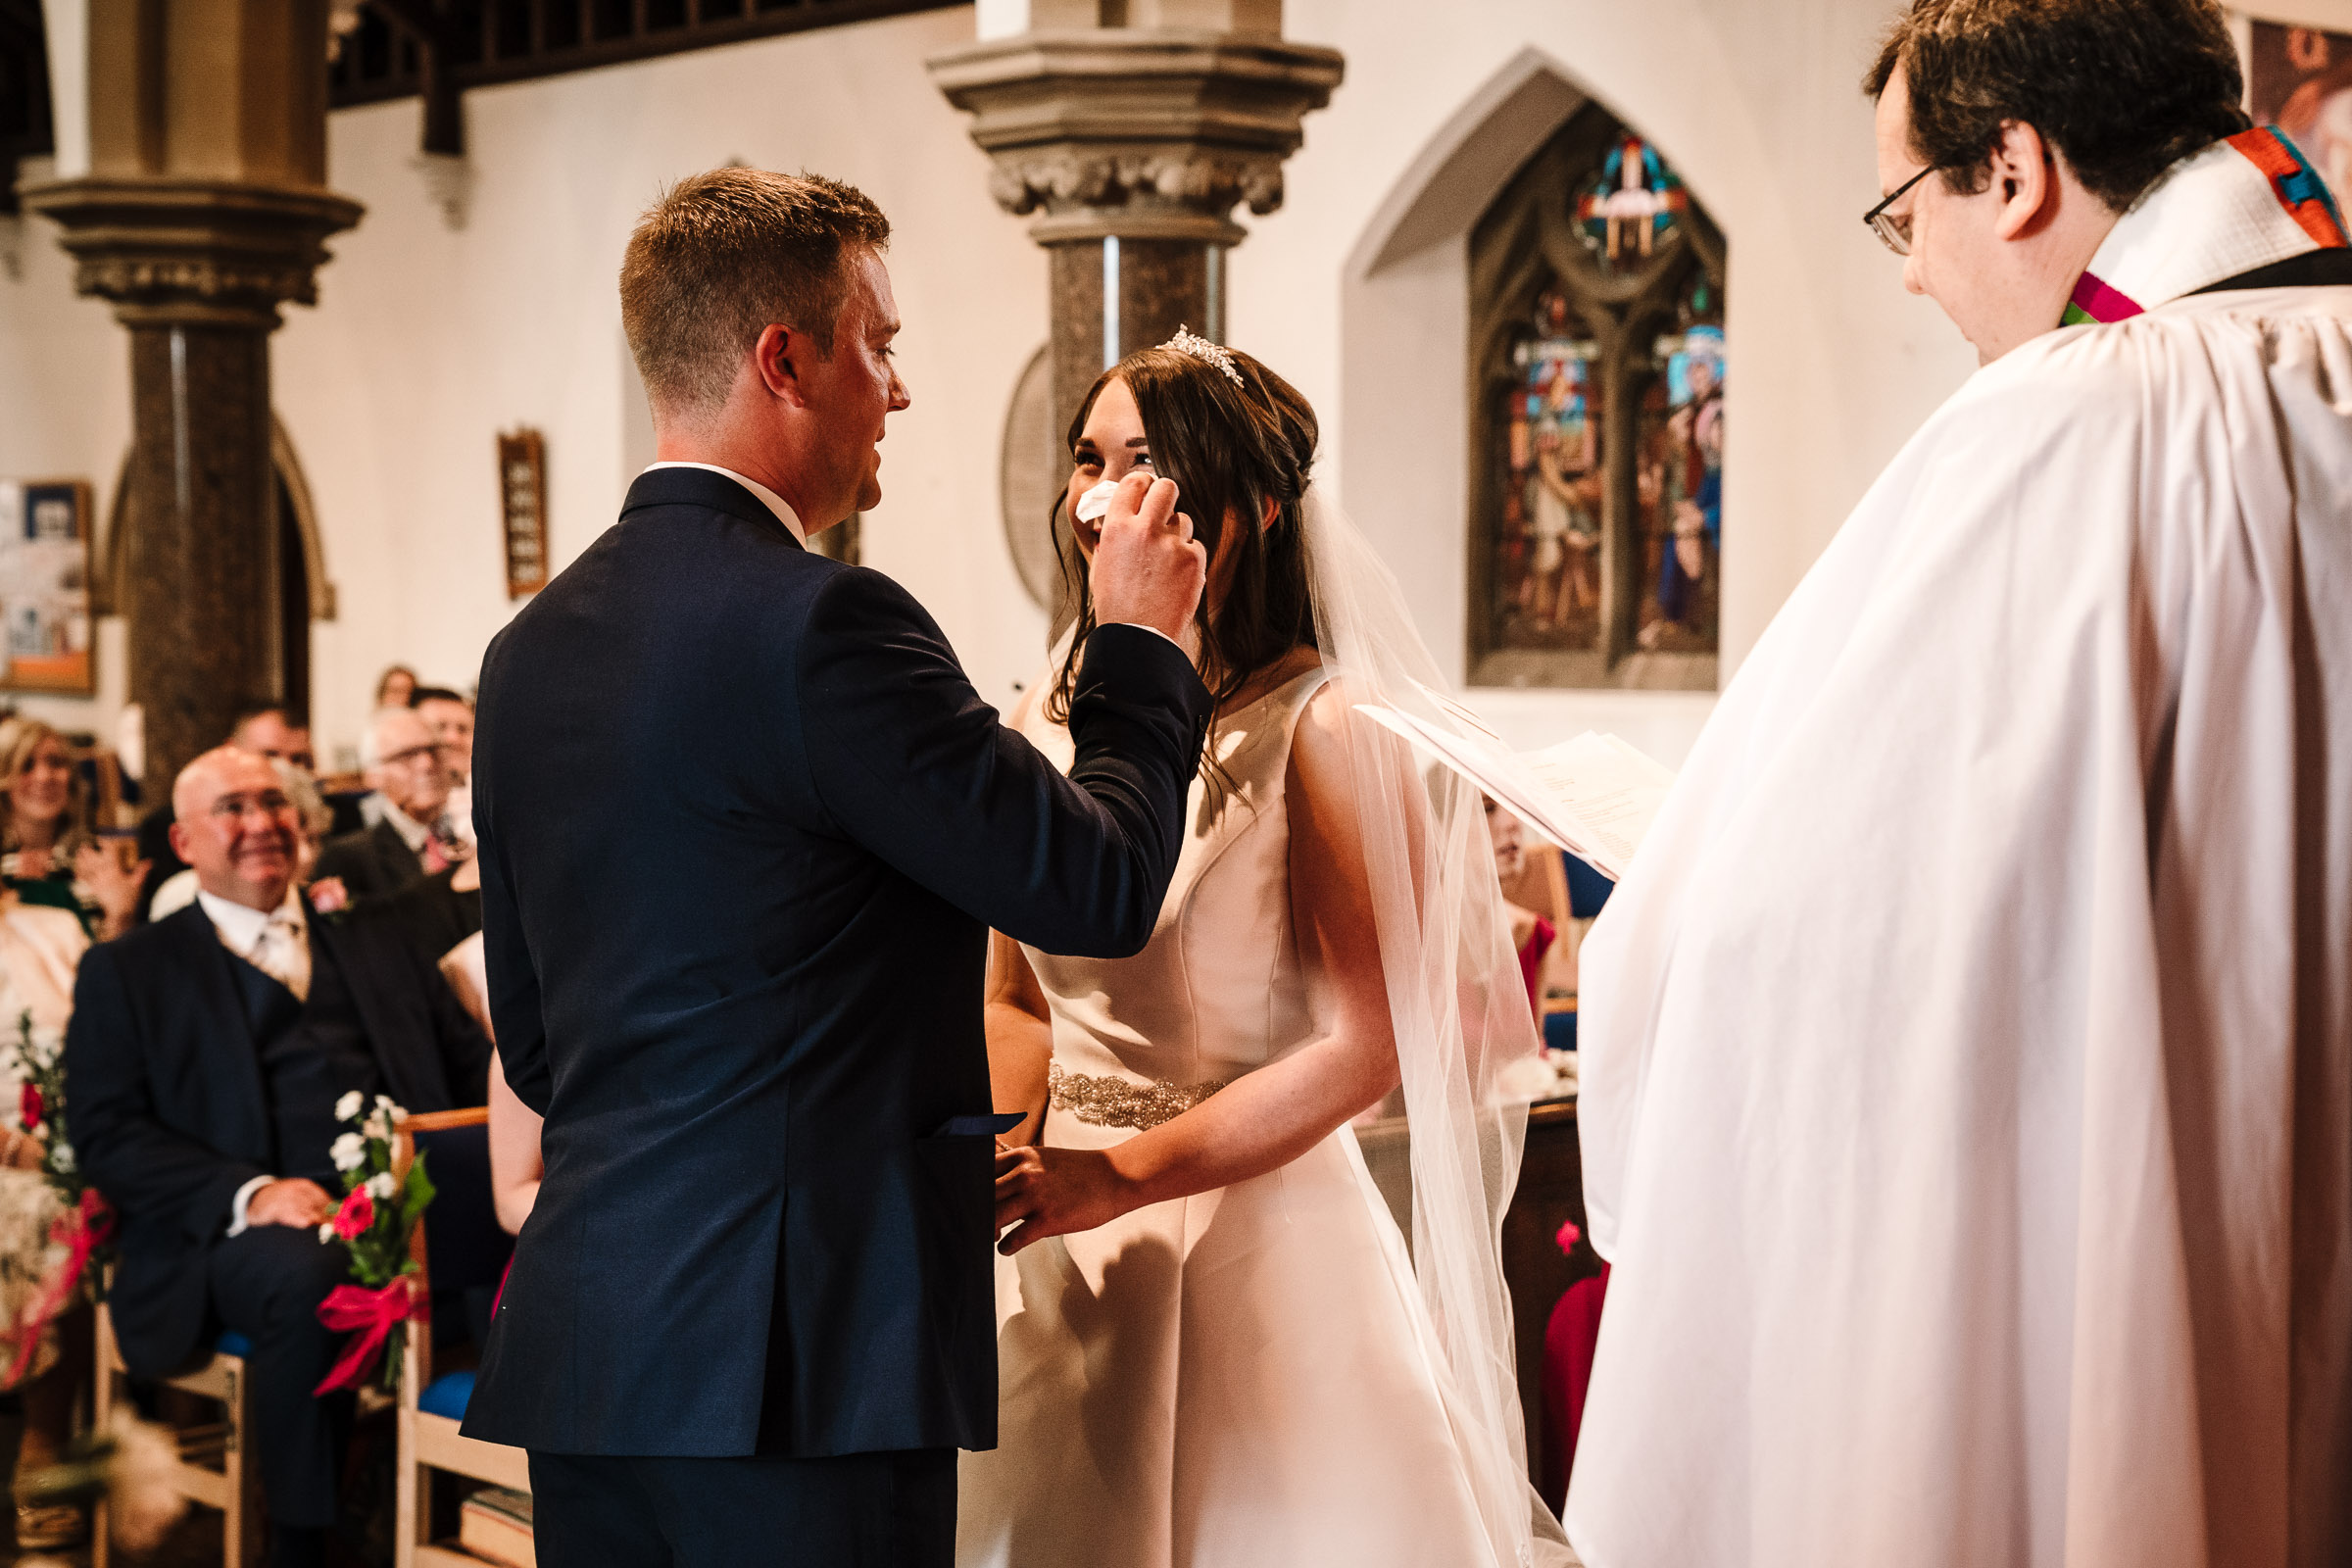 groom wiping tear away from brides face during wedding ceremony